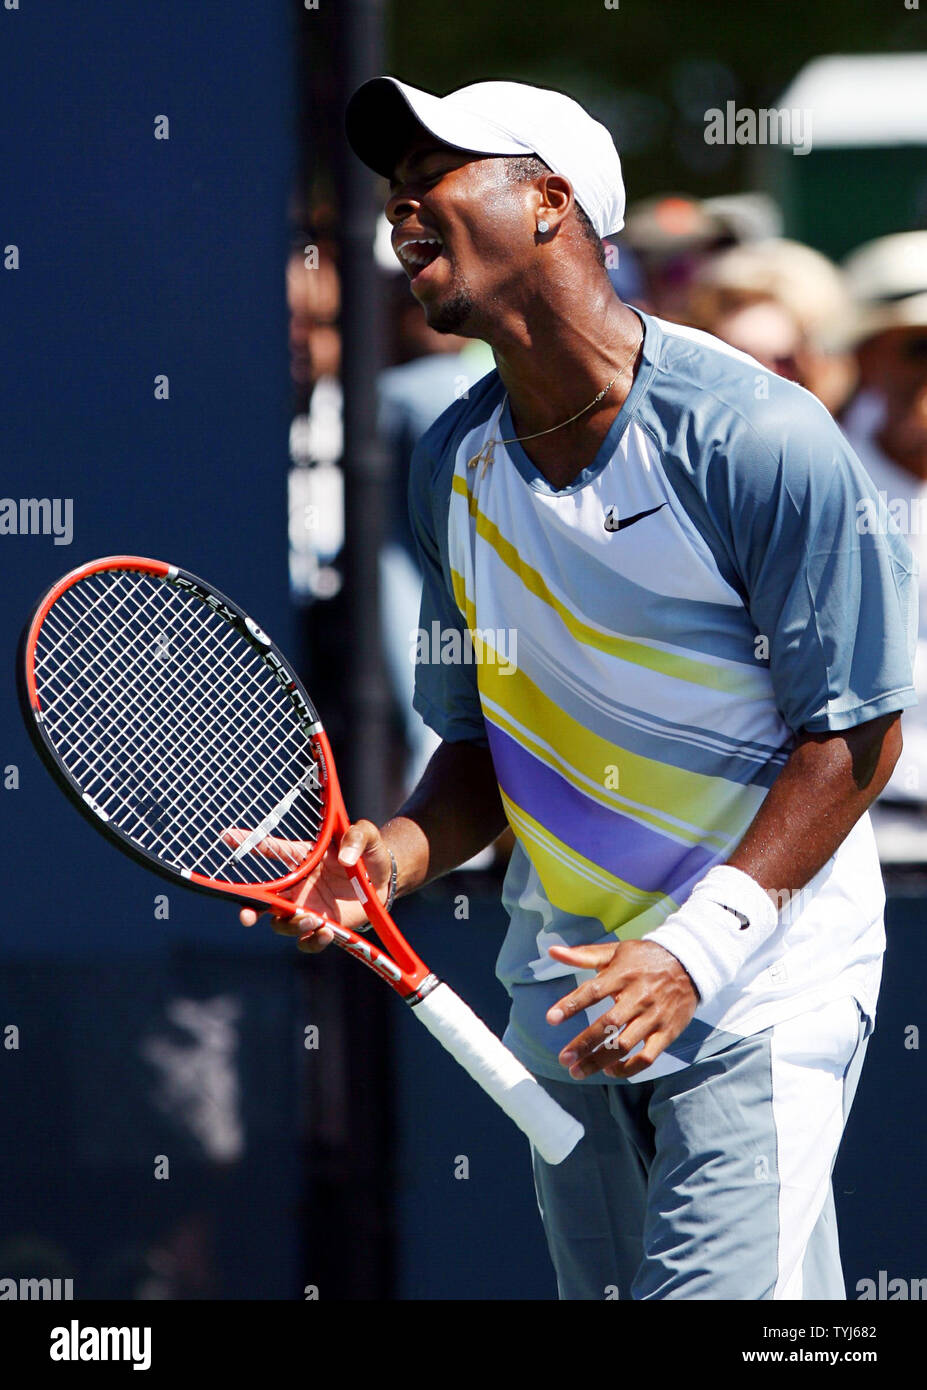 Donald Young reacts after a lost point in the first set of his match against Chris Guccione at the U.S. Open in New York City on August 27, 2007.  (UPI Photo/John Angelillo) Stock Photo